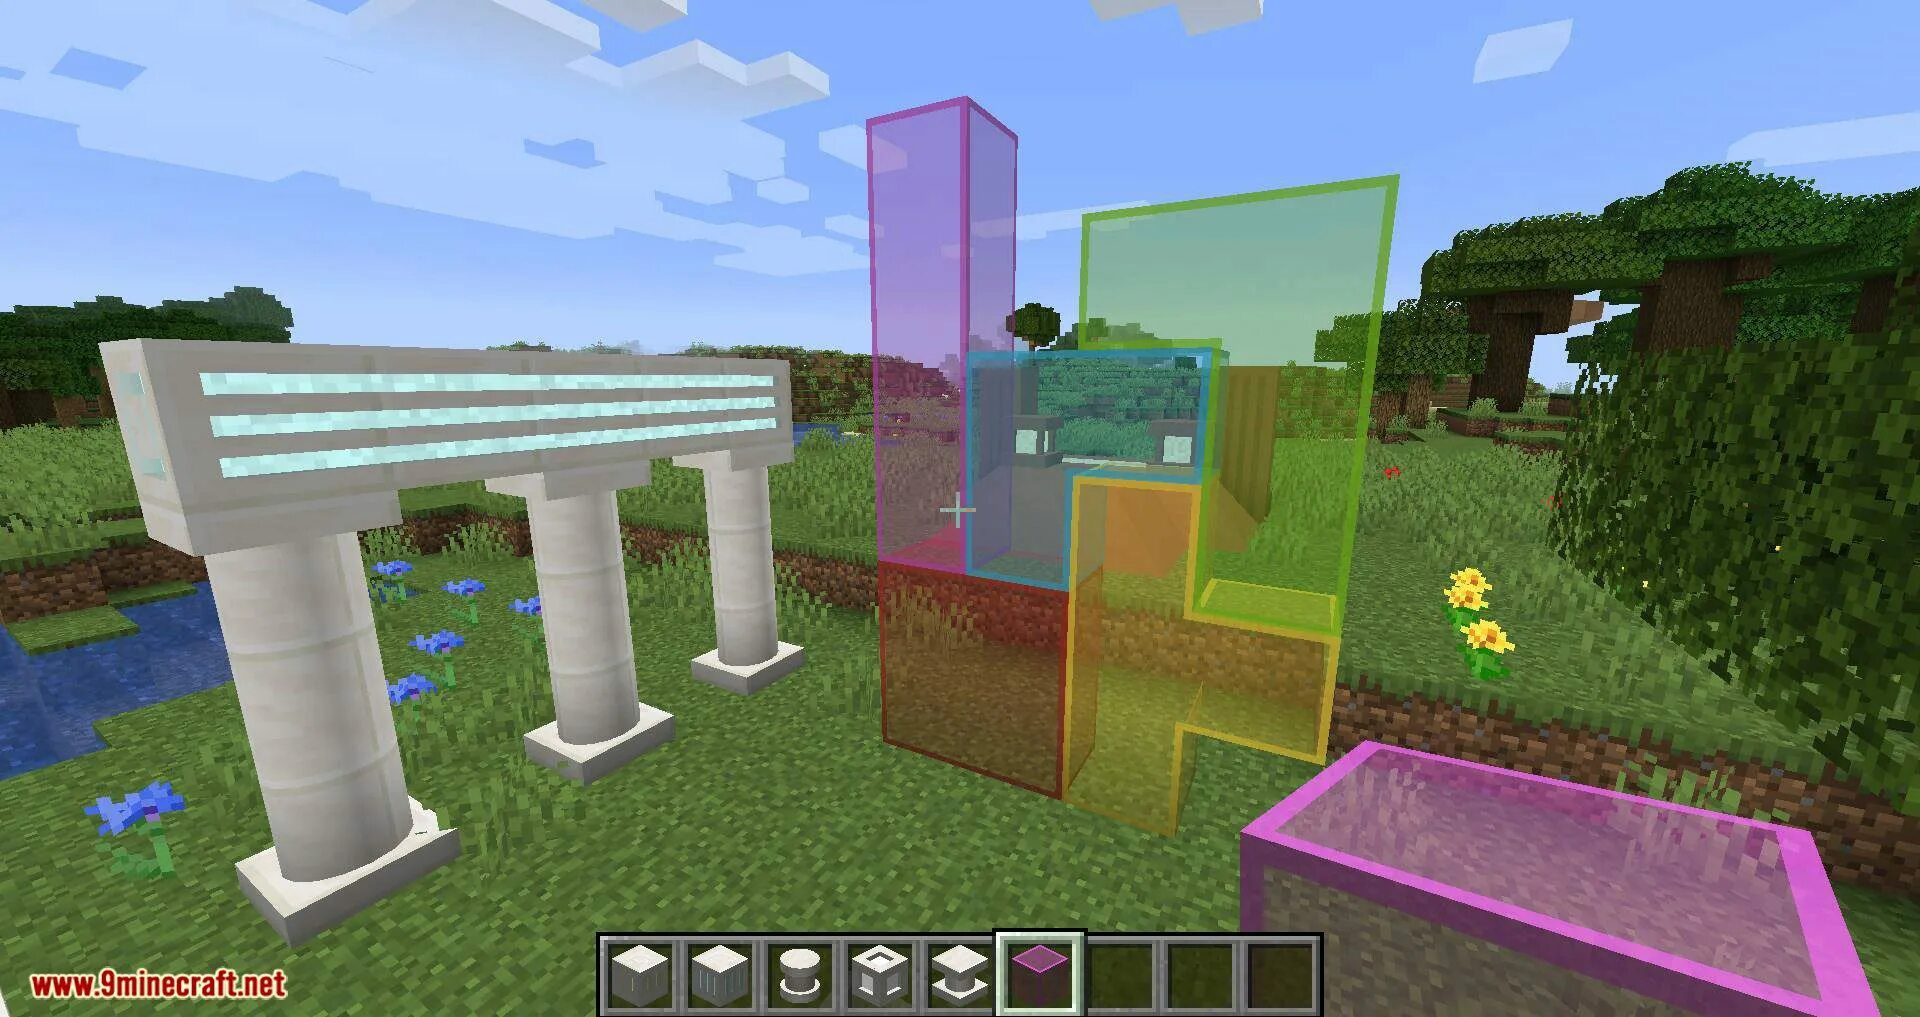 Minecraft connection of Blocks. Exotic Mod. All in one [Modded one Block]. Ll in one [Modded one Block]. Now blocks